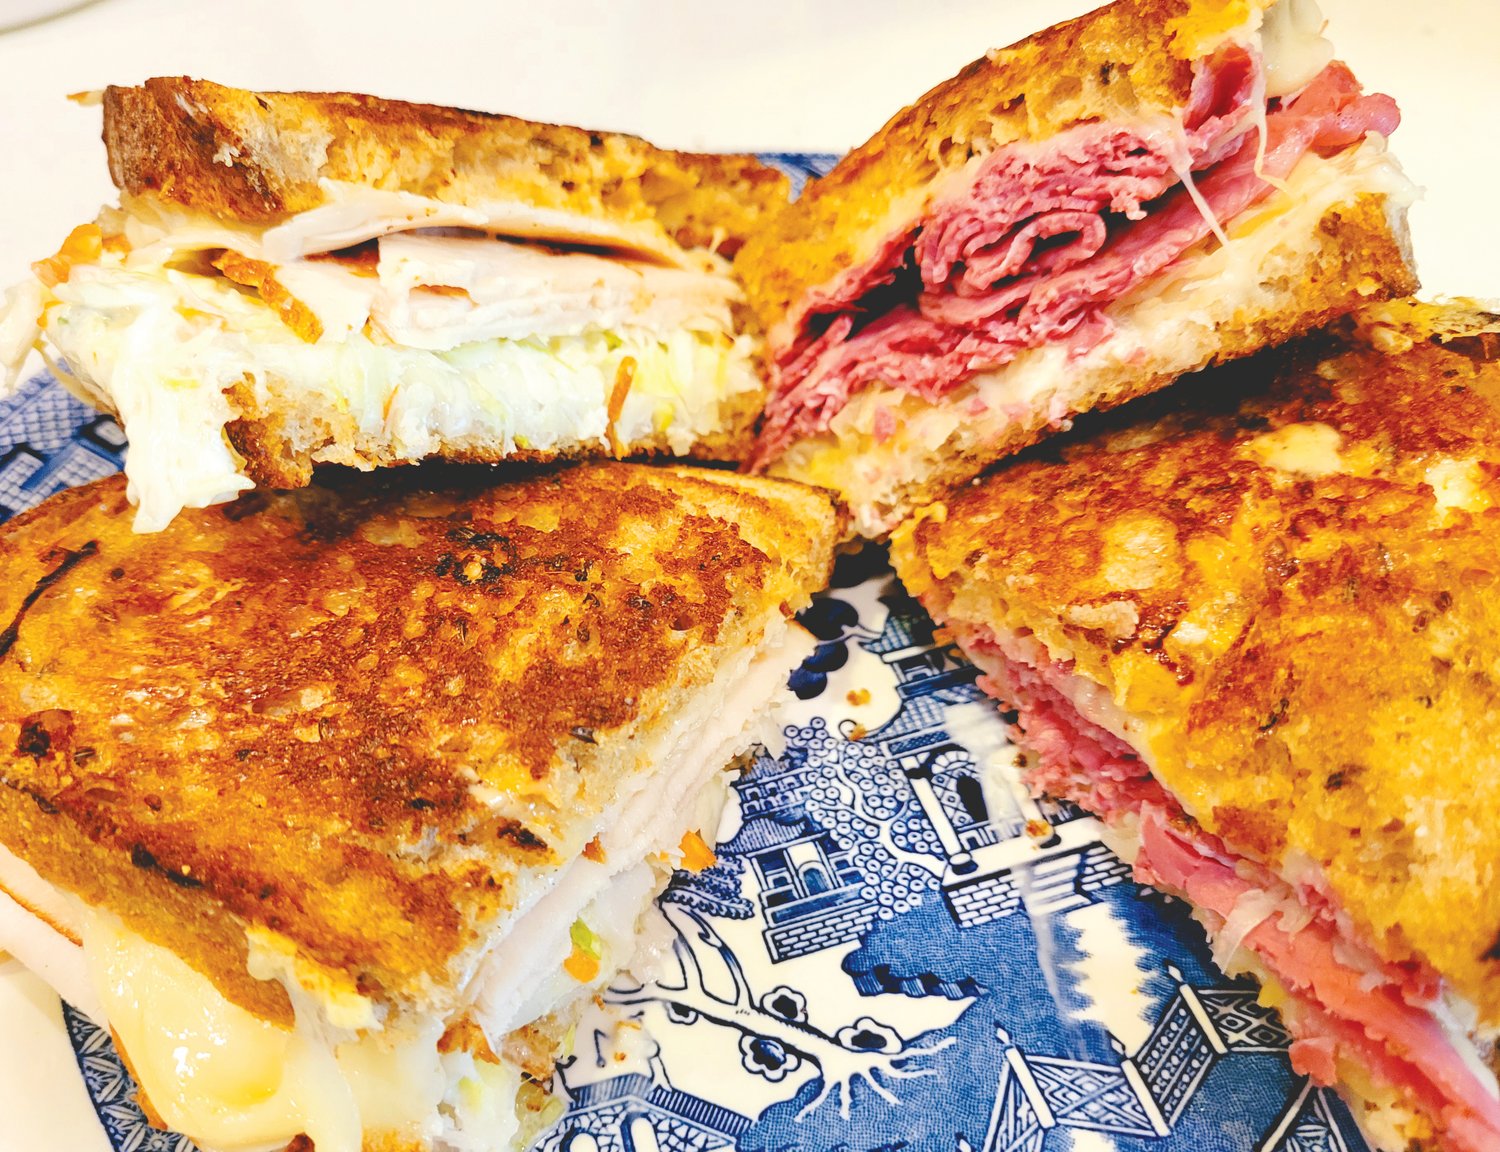 Both the Reuben (right) and the Rachel sandwich combine unusual ingredients for a great taste.